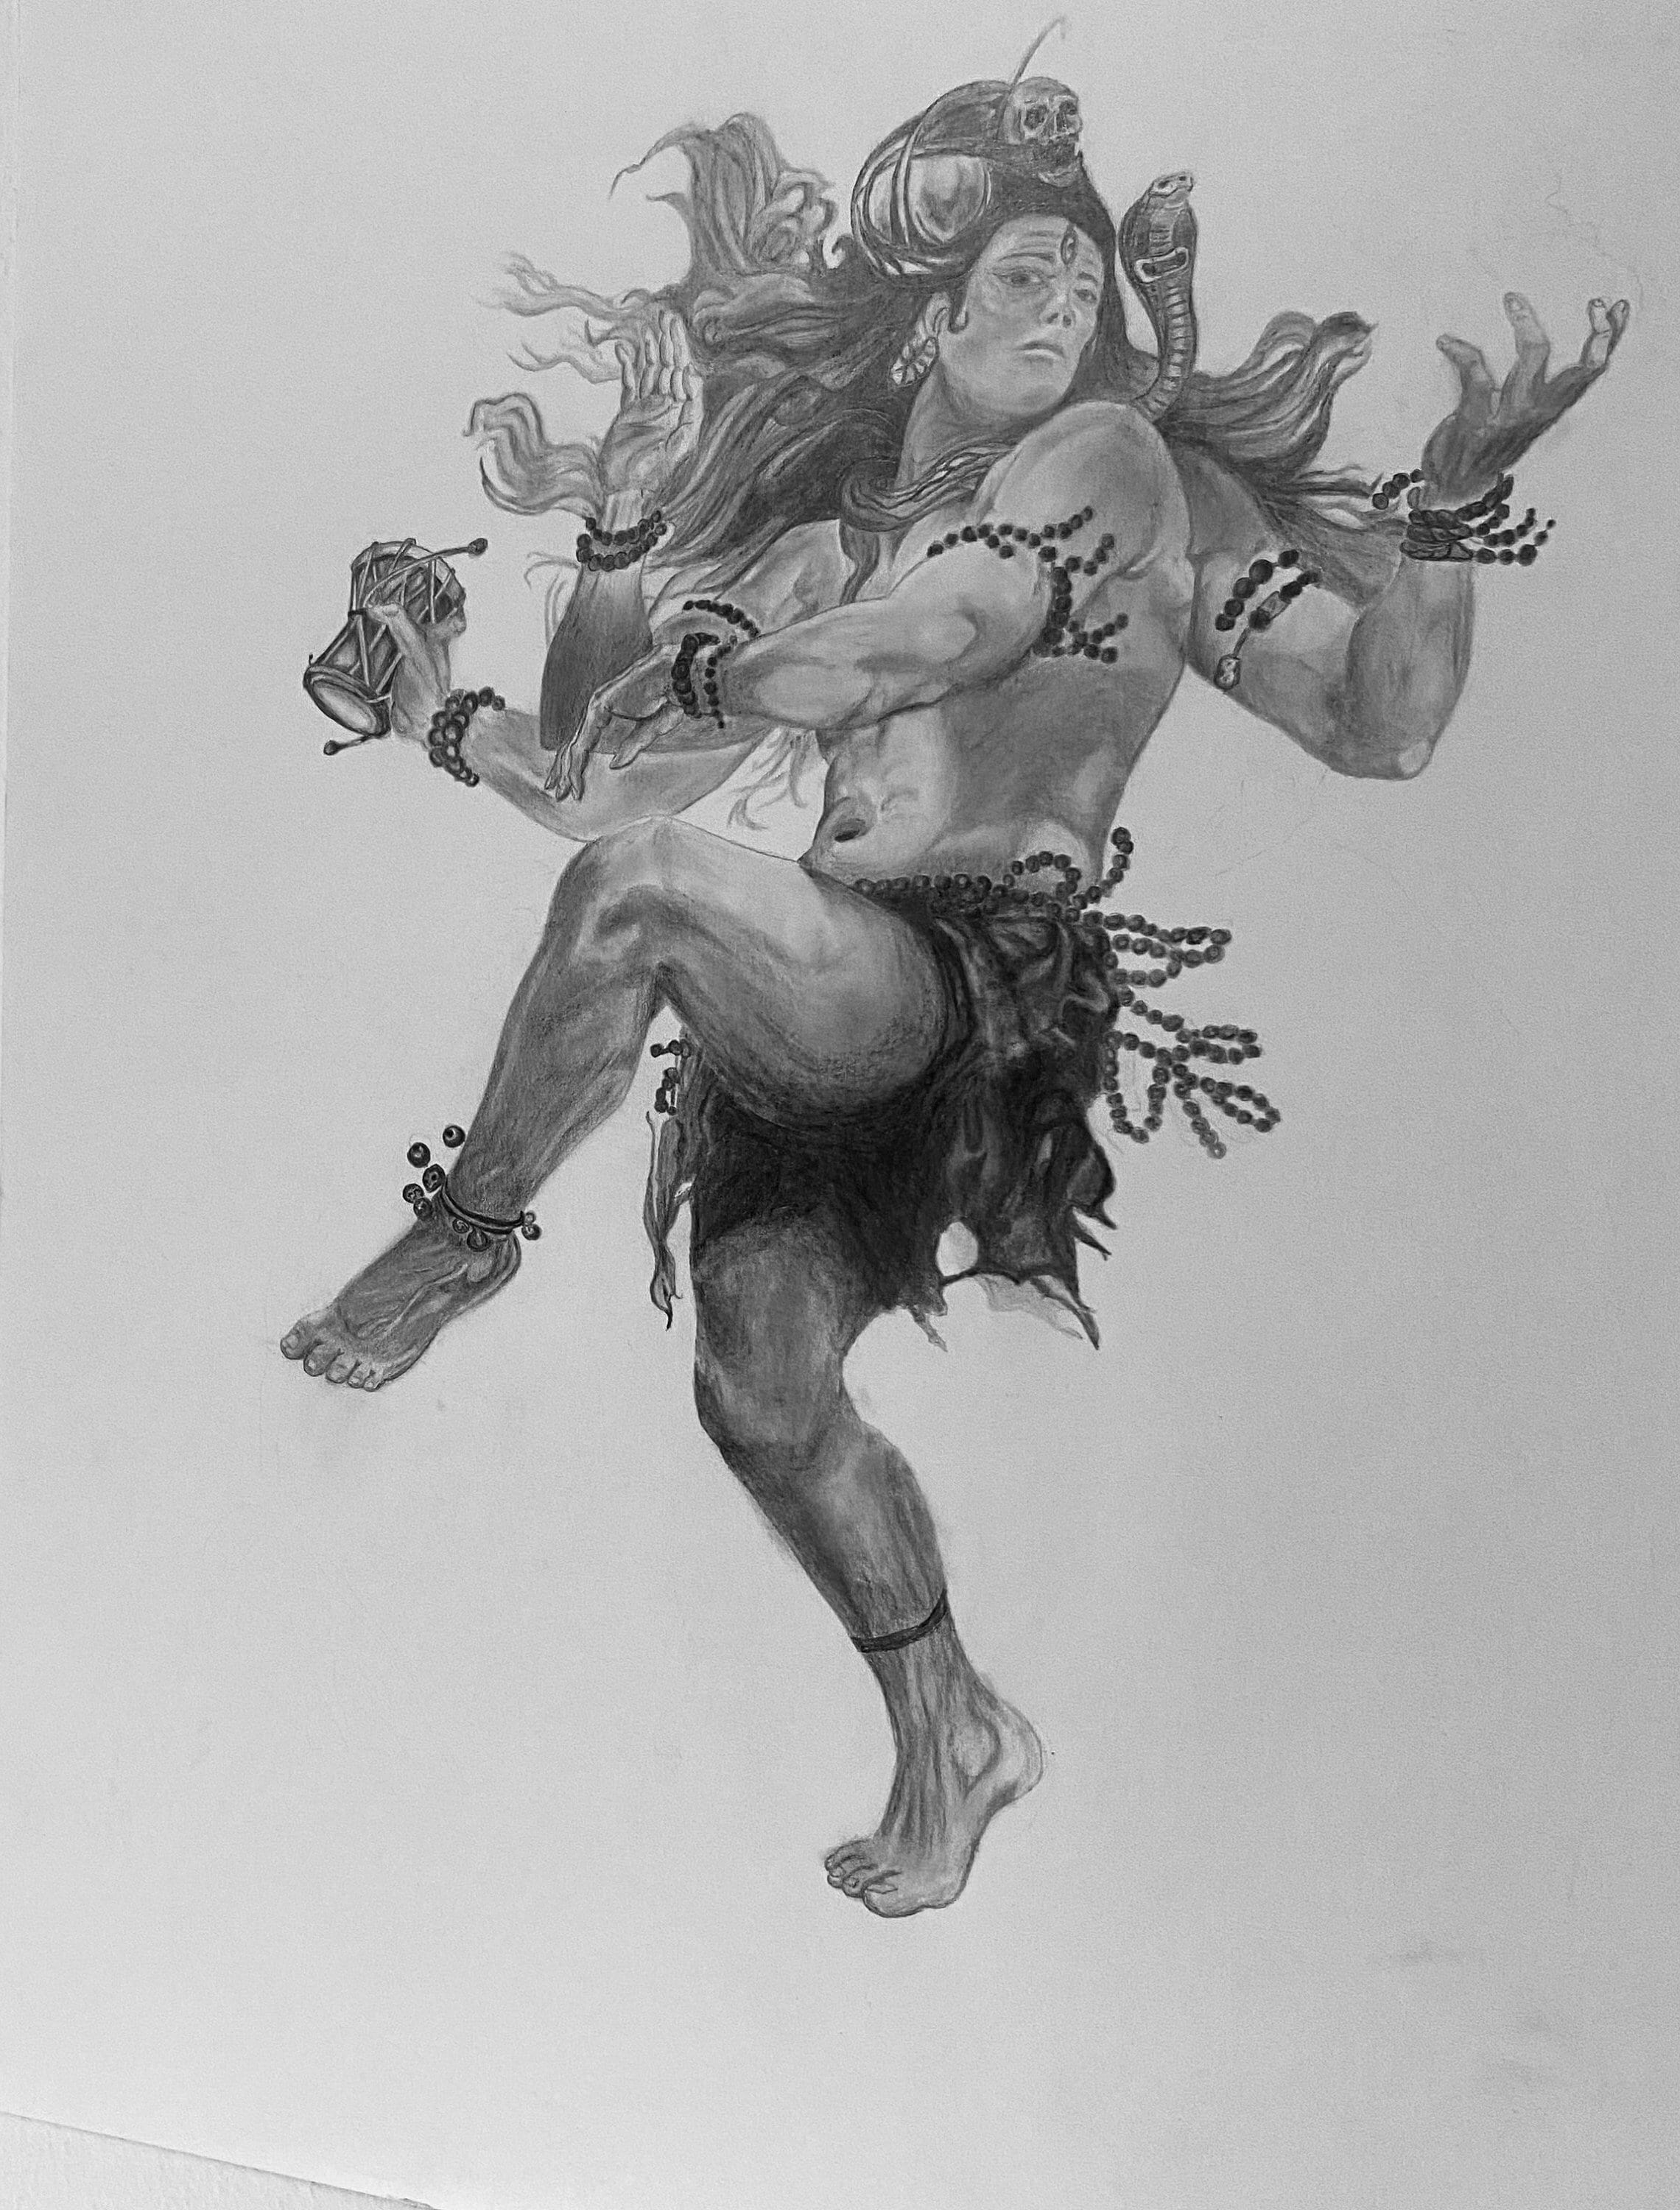 PENCIL DRAWING ART | Lord Shiva and parvati in Love. | Facebook